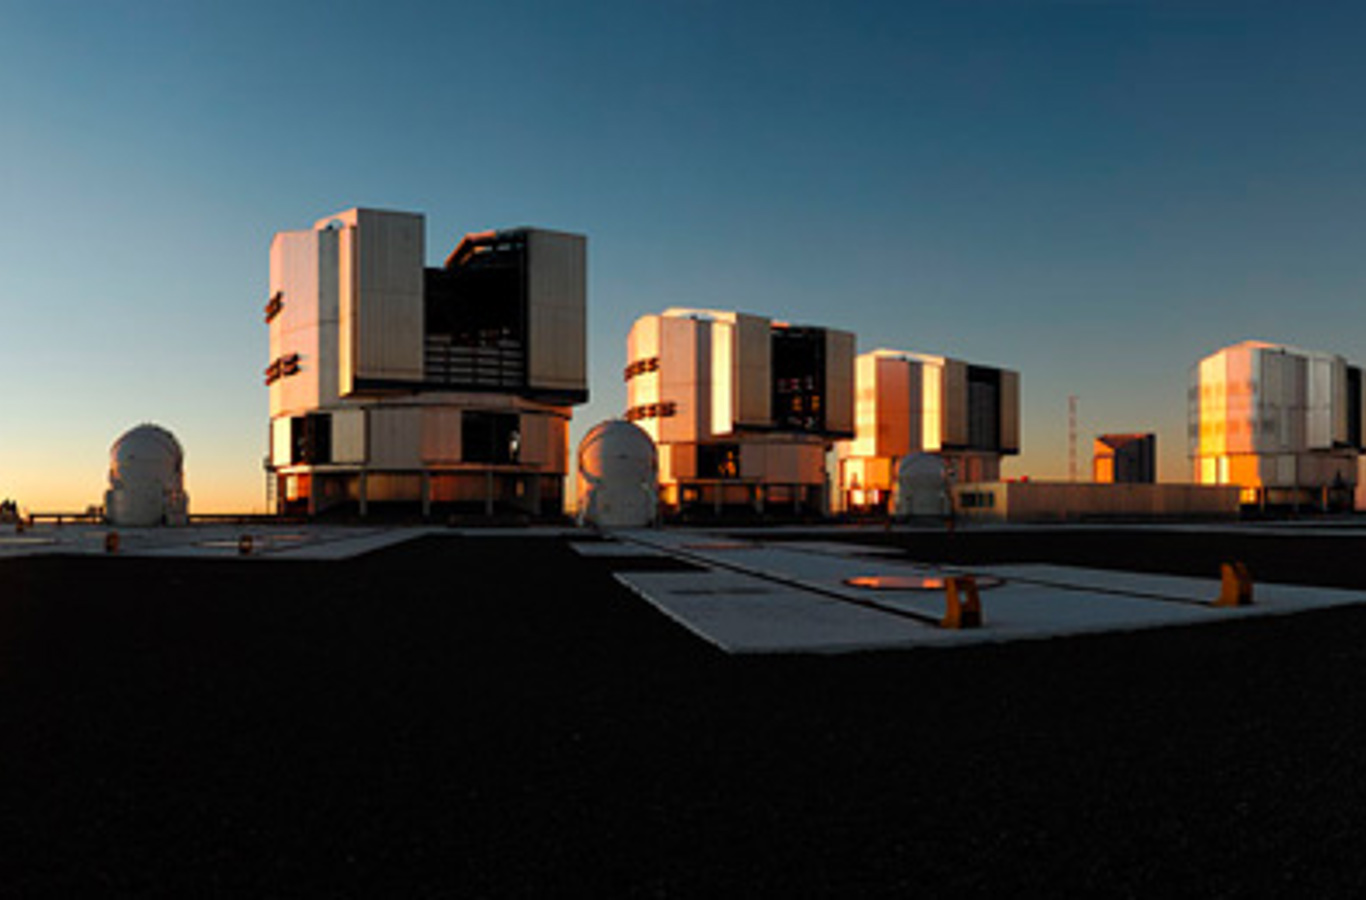 Very Large Telescope ved Paranal-observatoriet.